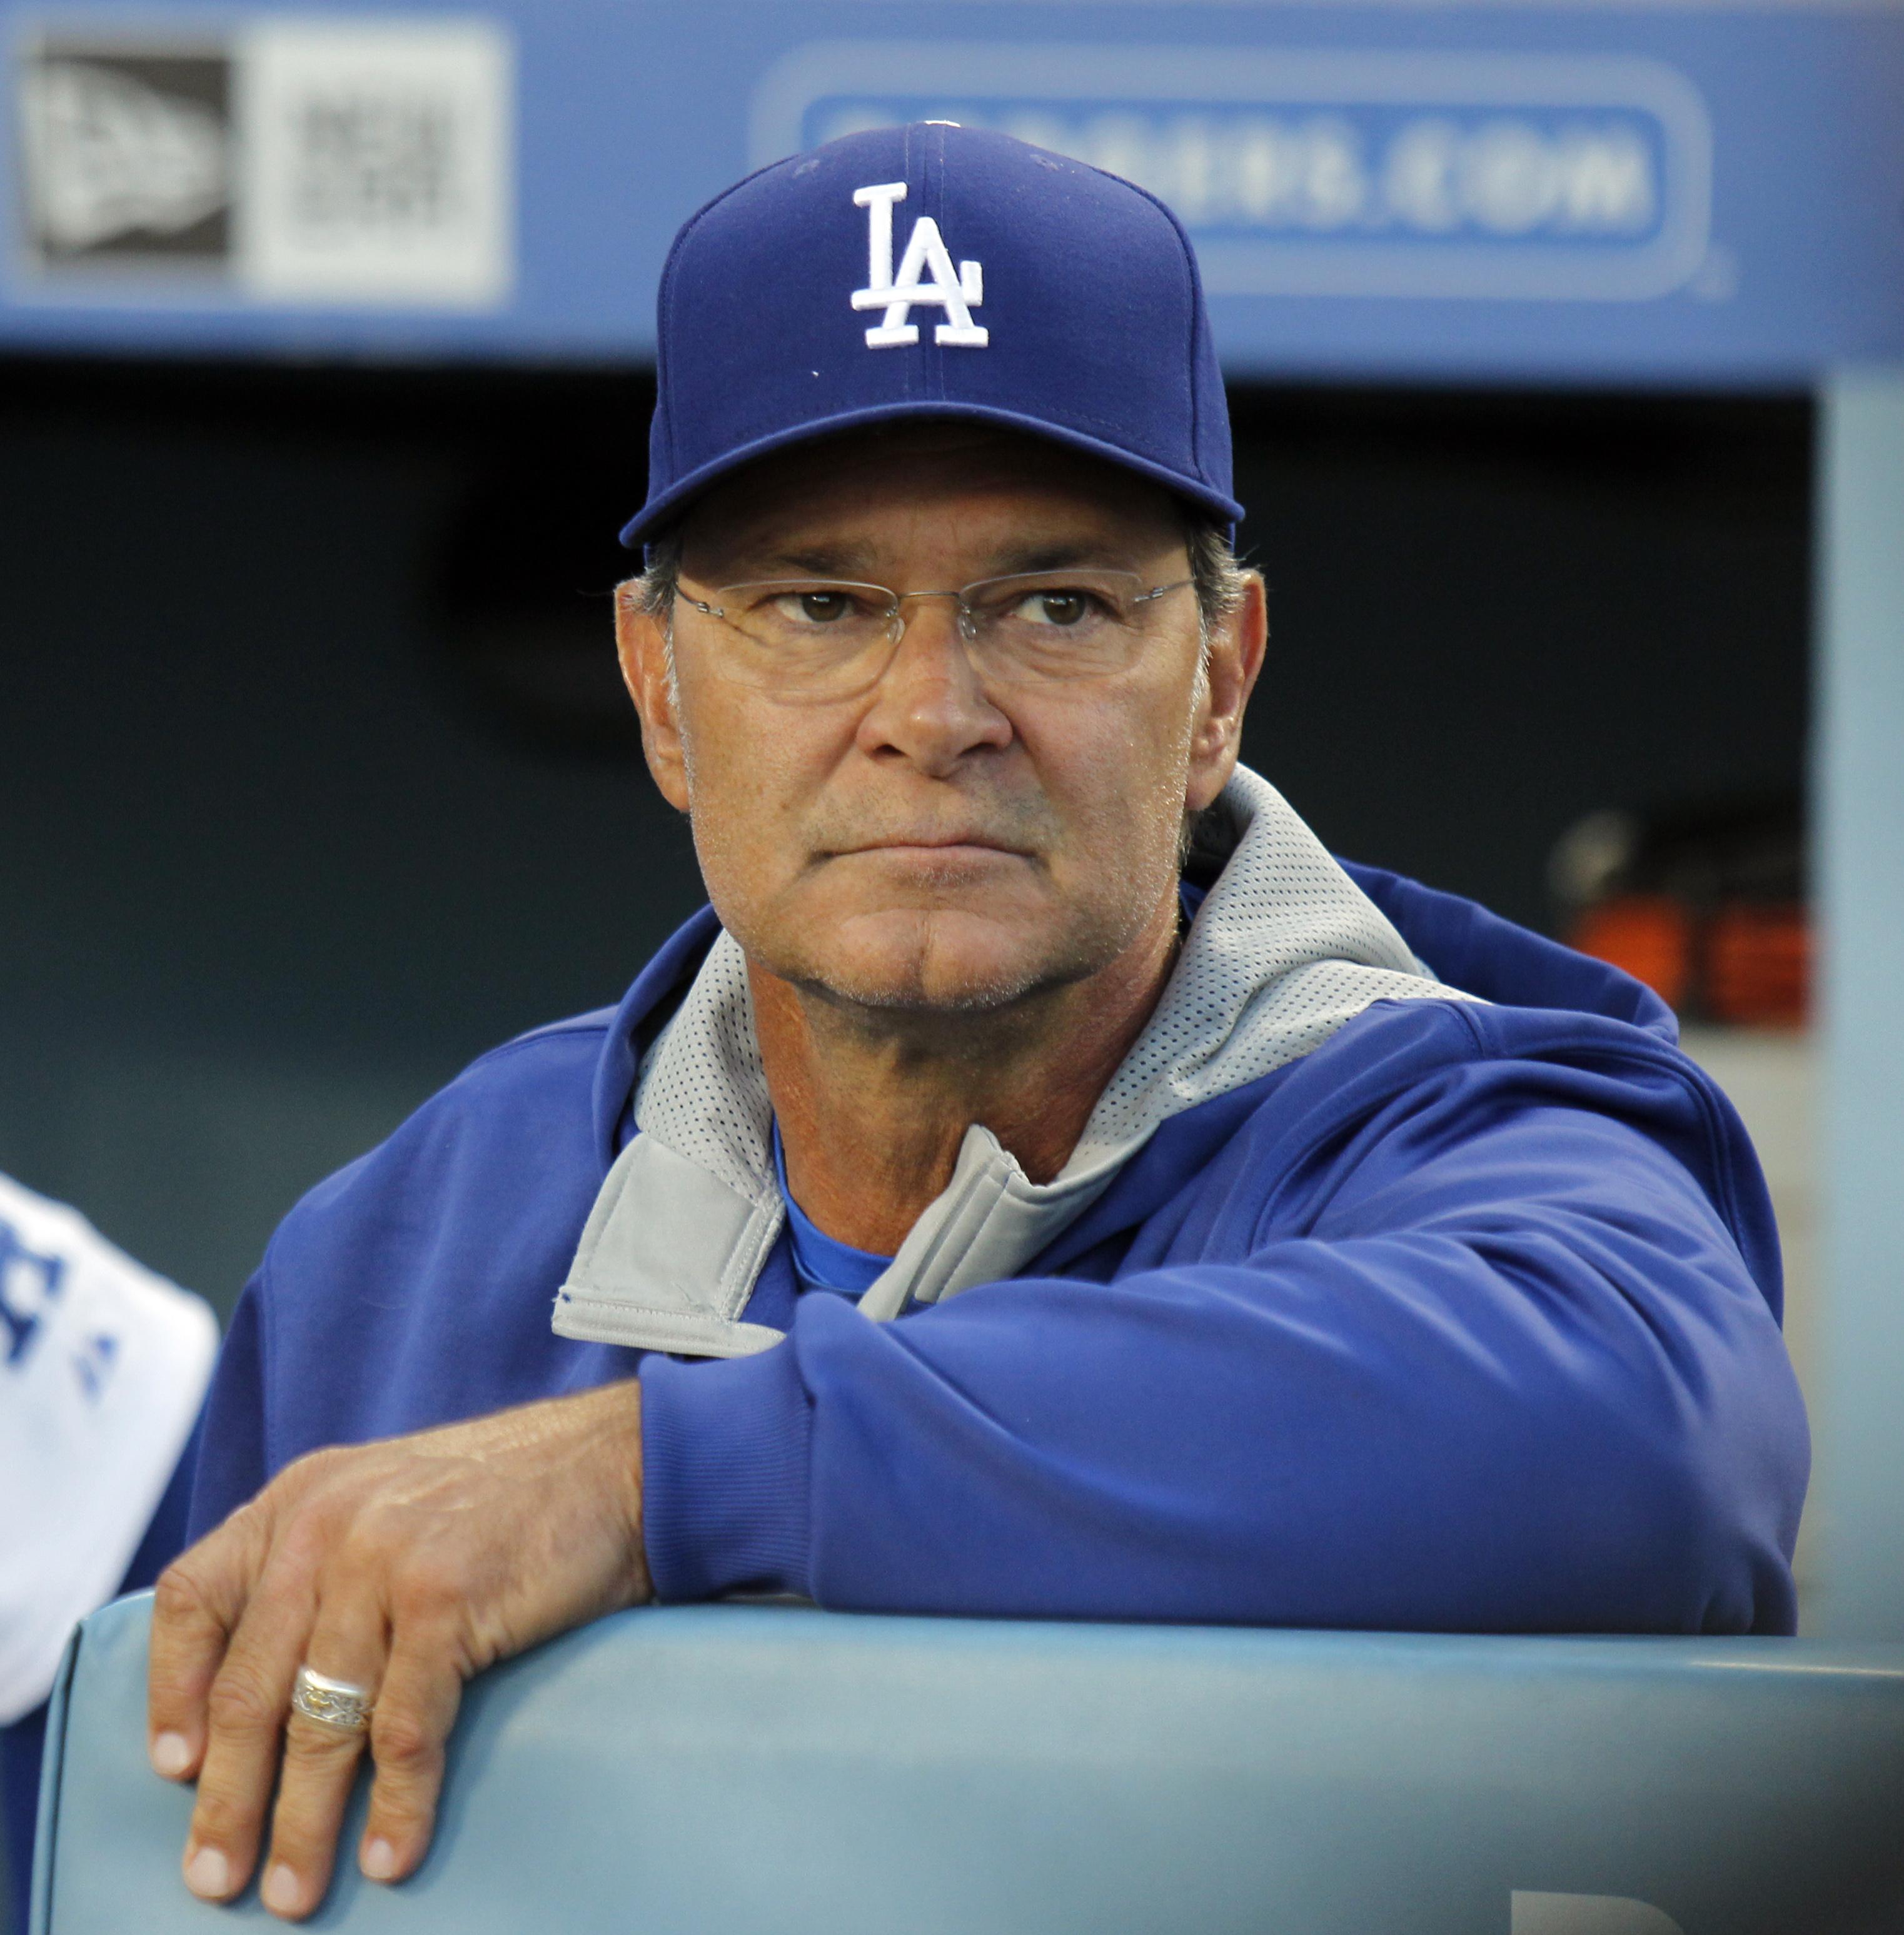 What we learned from 'Donnie Baseball' documentary about Don Mattingly